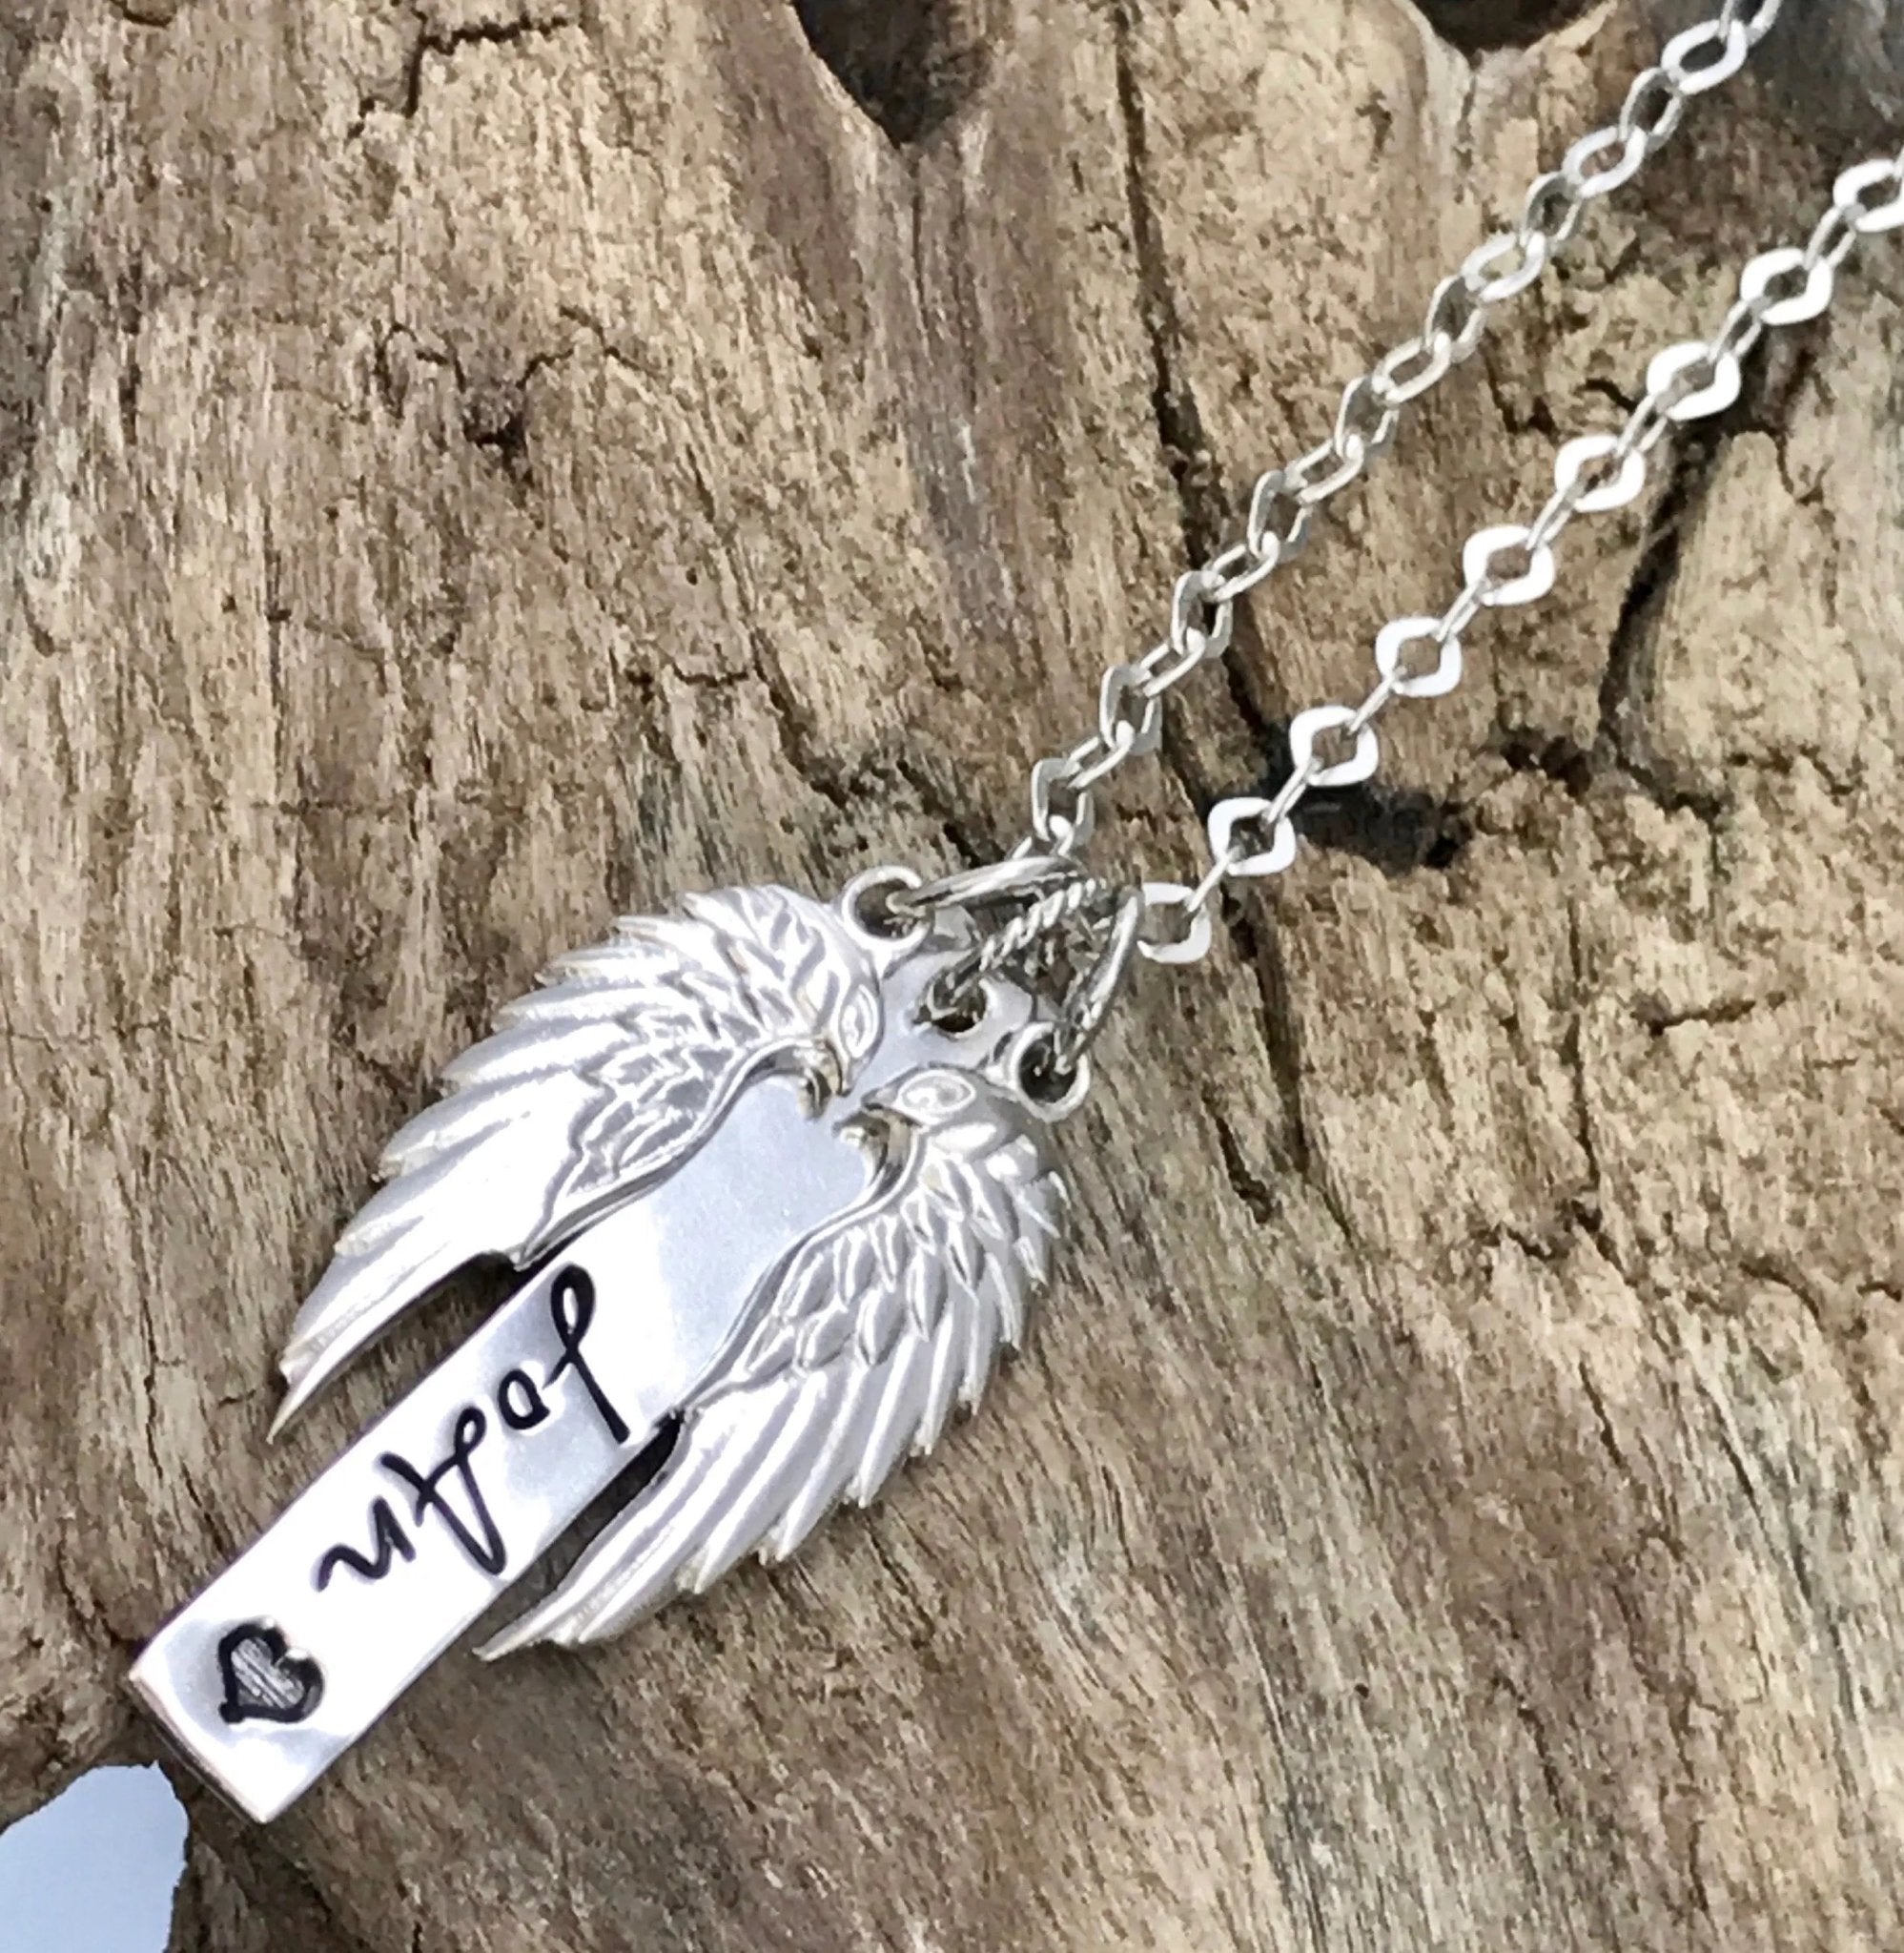 Personalized memorial necklace - Too beautiful for earth - angel wing  necklace - remembrance necklace - bereavement gift - in memory necklace